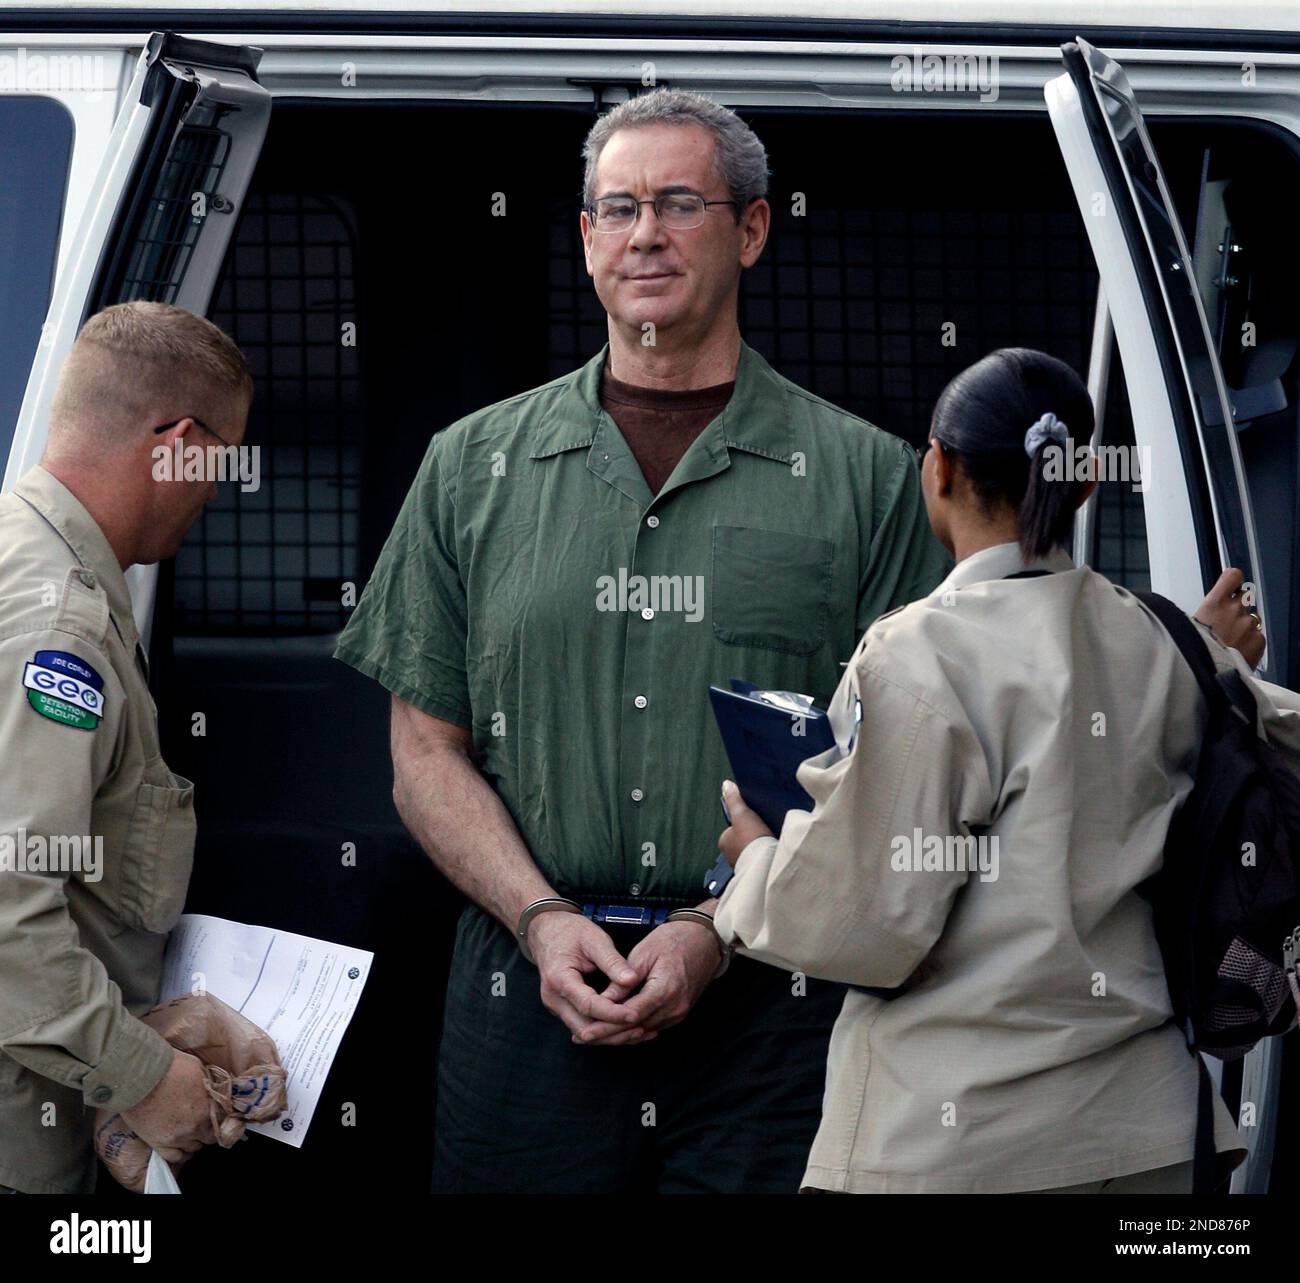 https://c8.alamy.com/comp/2ND876P/r-allen-stanford-arrives-in-custody-at-the-federal-courthouse-for-a-hearing-tuesday-aug-24-2010-in-houston-stanford-and-three-of-his-former-company-executives-have-racked-up-millions-of-dollars-in-legal-fees-as-they-defend-themselves-against-charges-they-bilked-investors-out-of-7-billion-in-a-massive-ponzi-scheme-an-insurance-policy-has-thus-far-covered-their-legal-bills-but-the-insurer-lloyds-of-london-is-trying-to-turn-off-the-financial-spigot-by-having-the-policy-voided-stanford-and-the-ex-executives-have-sued-lloyds-ap-photodavid-j-phillip-2ND876P.jpg